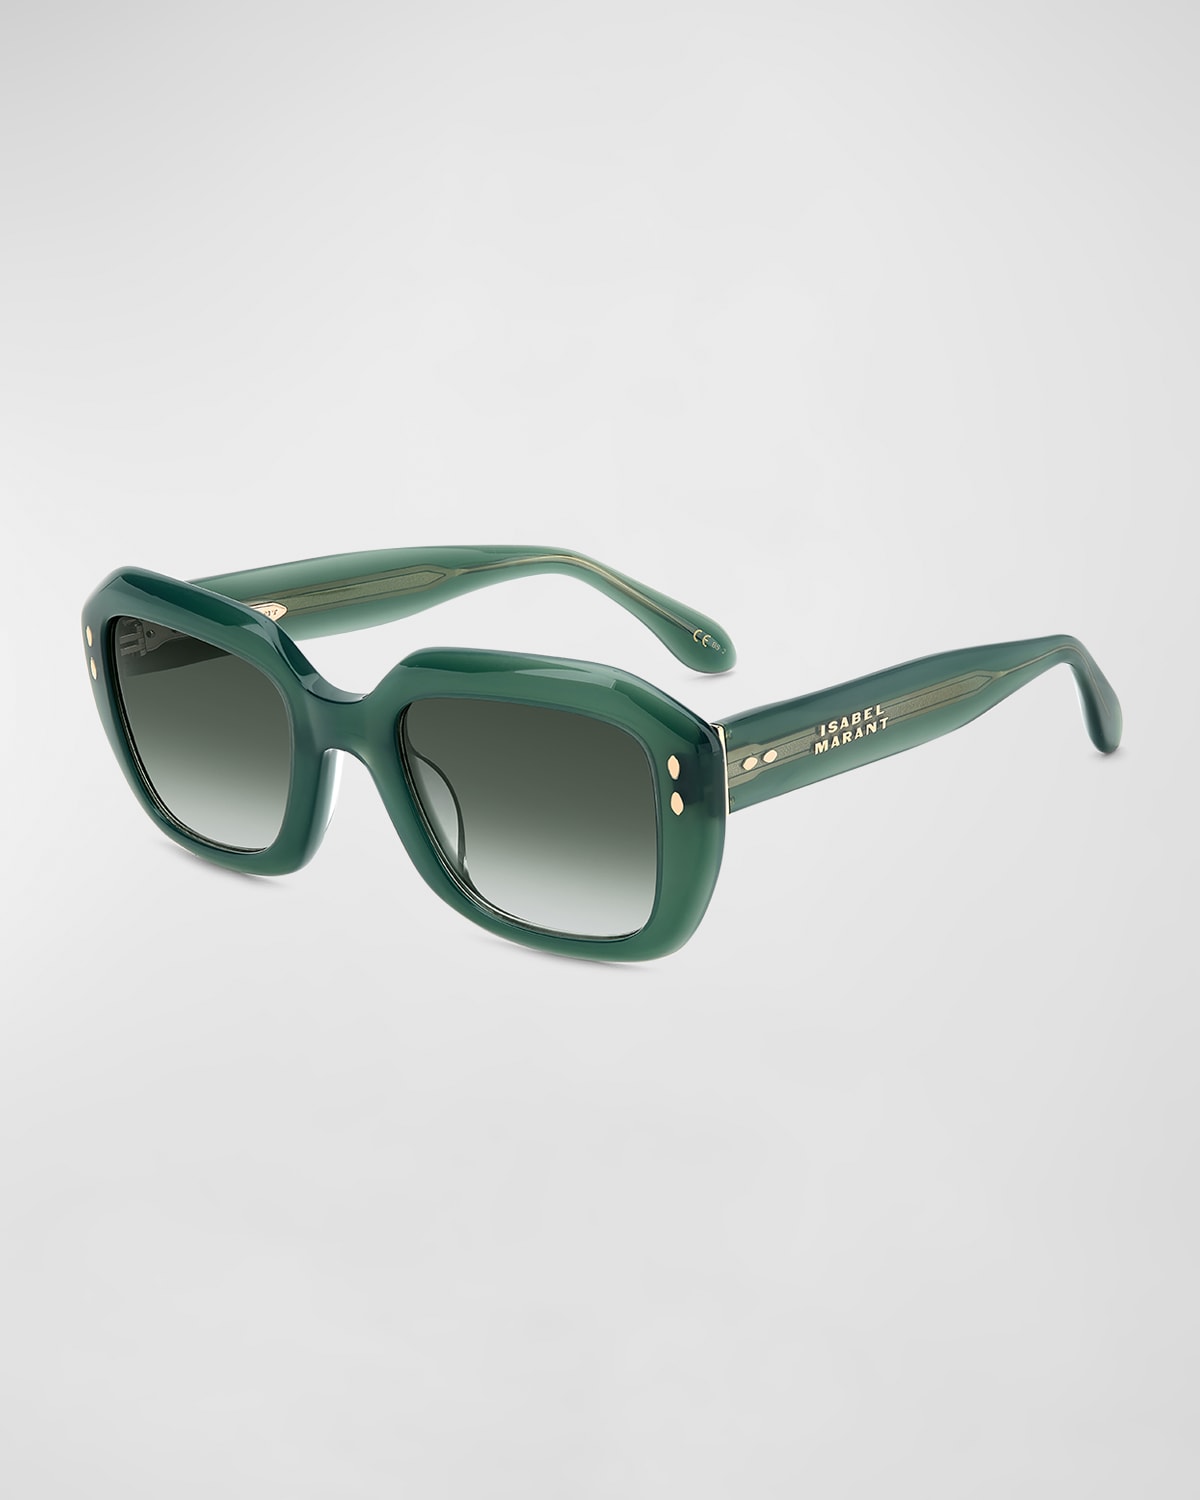 Isabel Marant Chunky Acetate Rectangle Sunglasses In Green/green Gradient